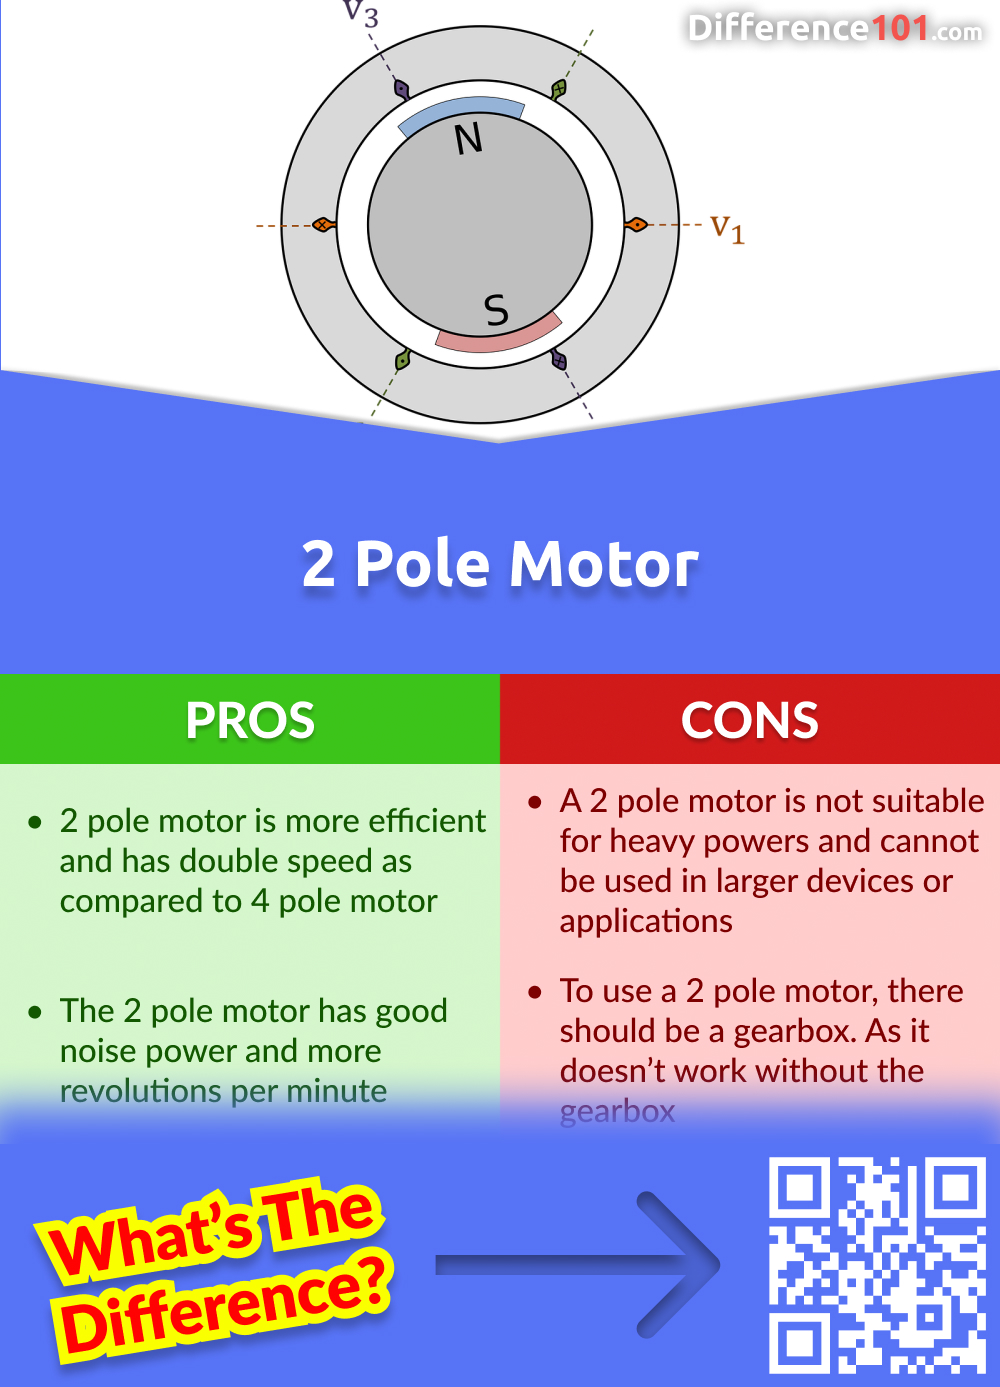 2 pole Motor Pros and Cons